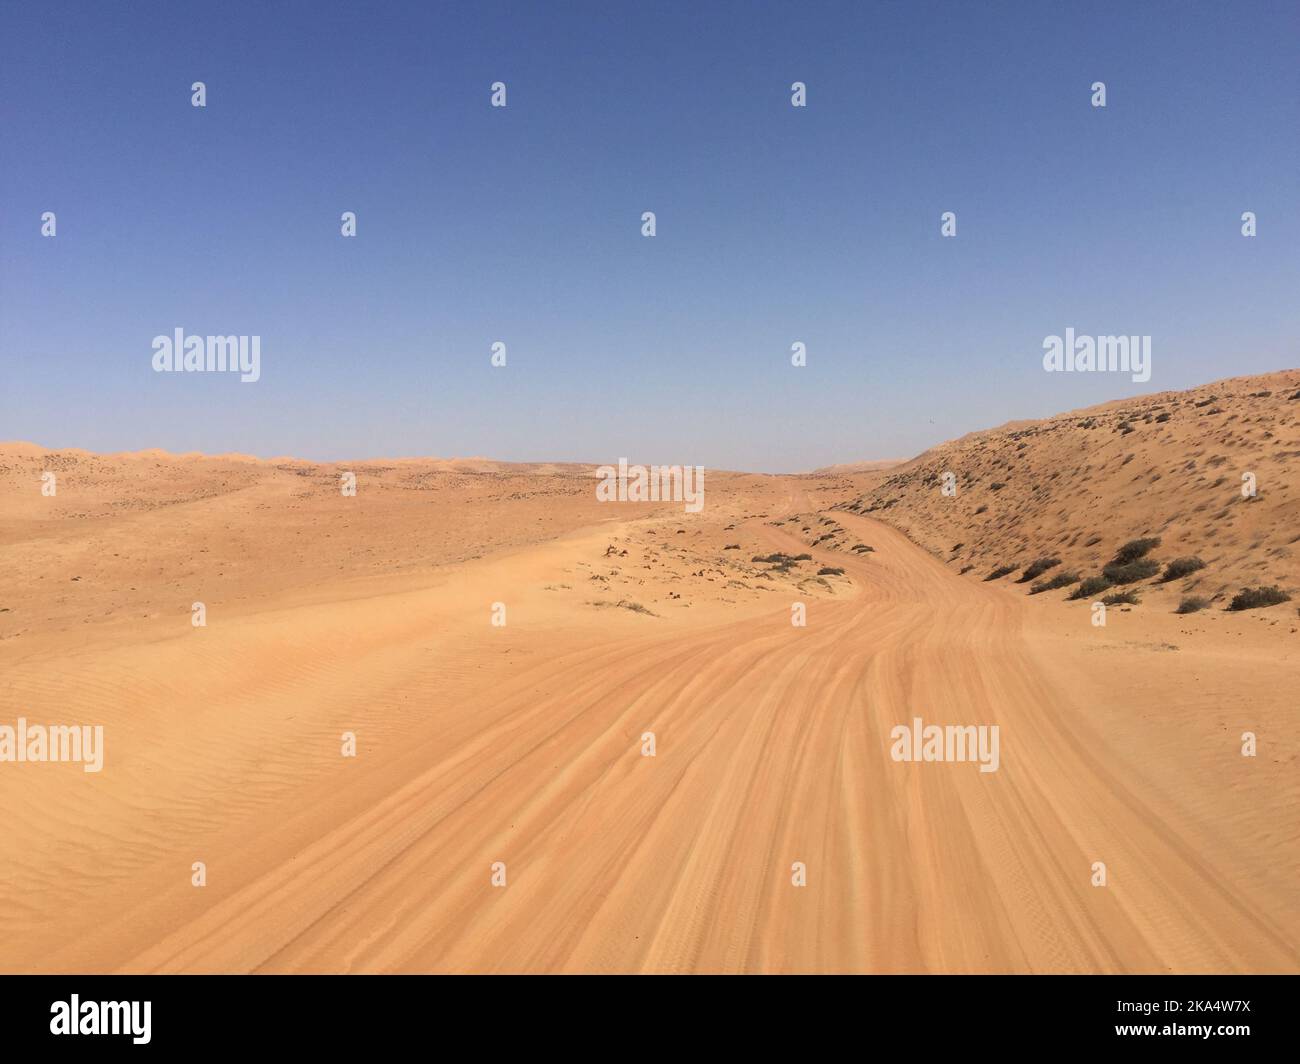 Tyre tracks through the sand dunes in desert landscape at sunset, Wahiba Sands, Oman Stock Photo